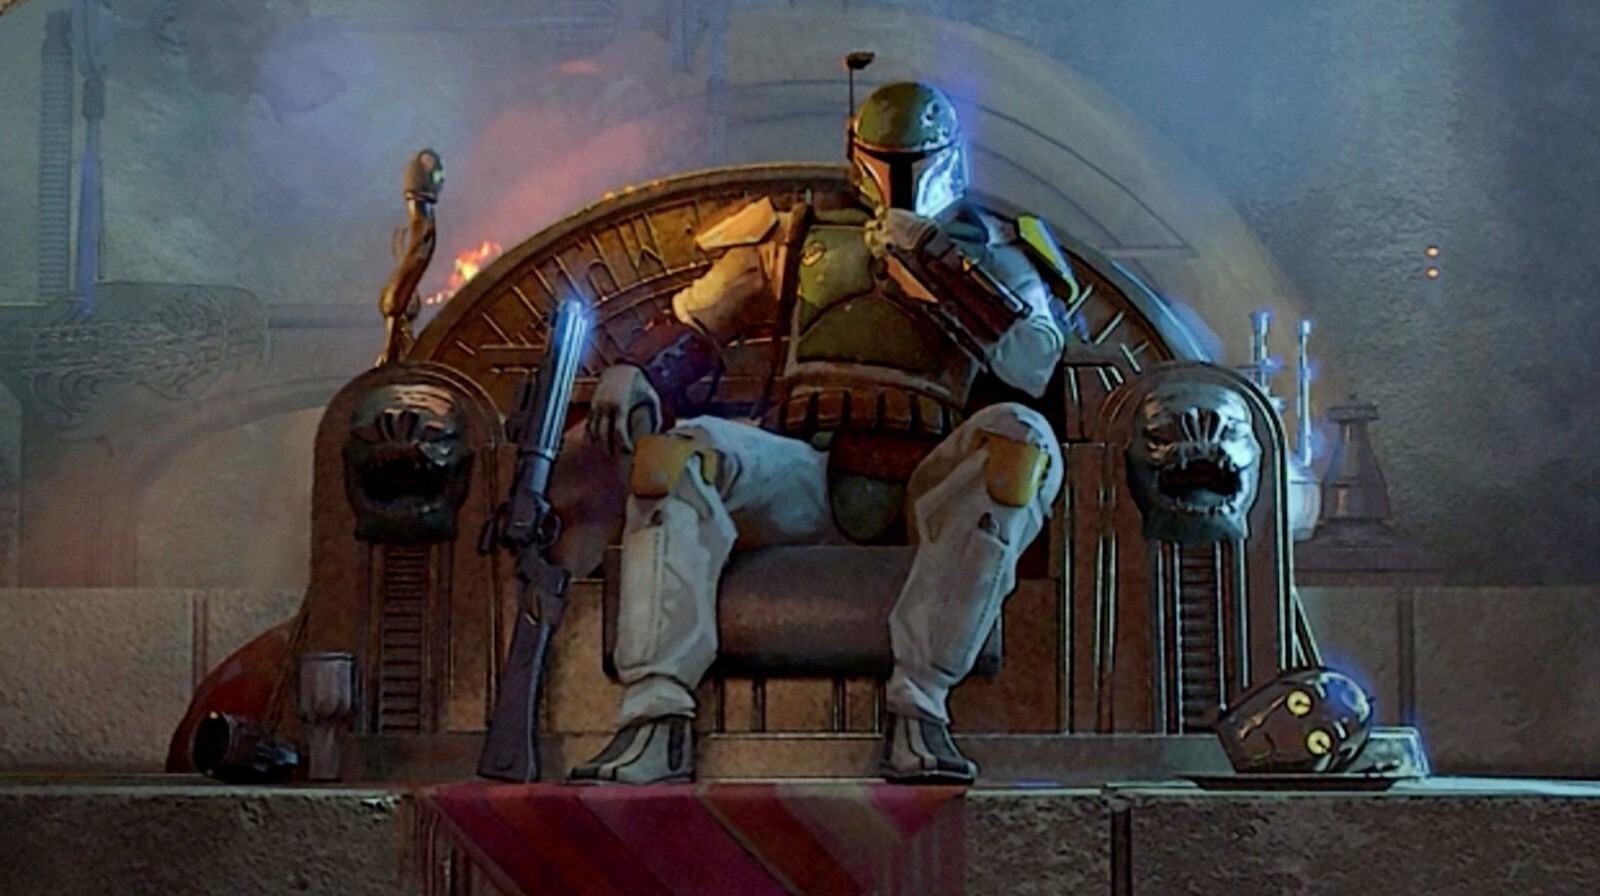 Following in the footsteps of The Mandalorian, the credits for The Book of ...